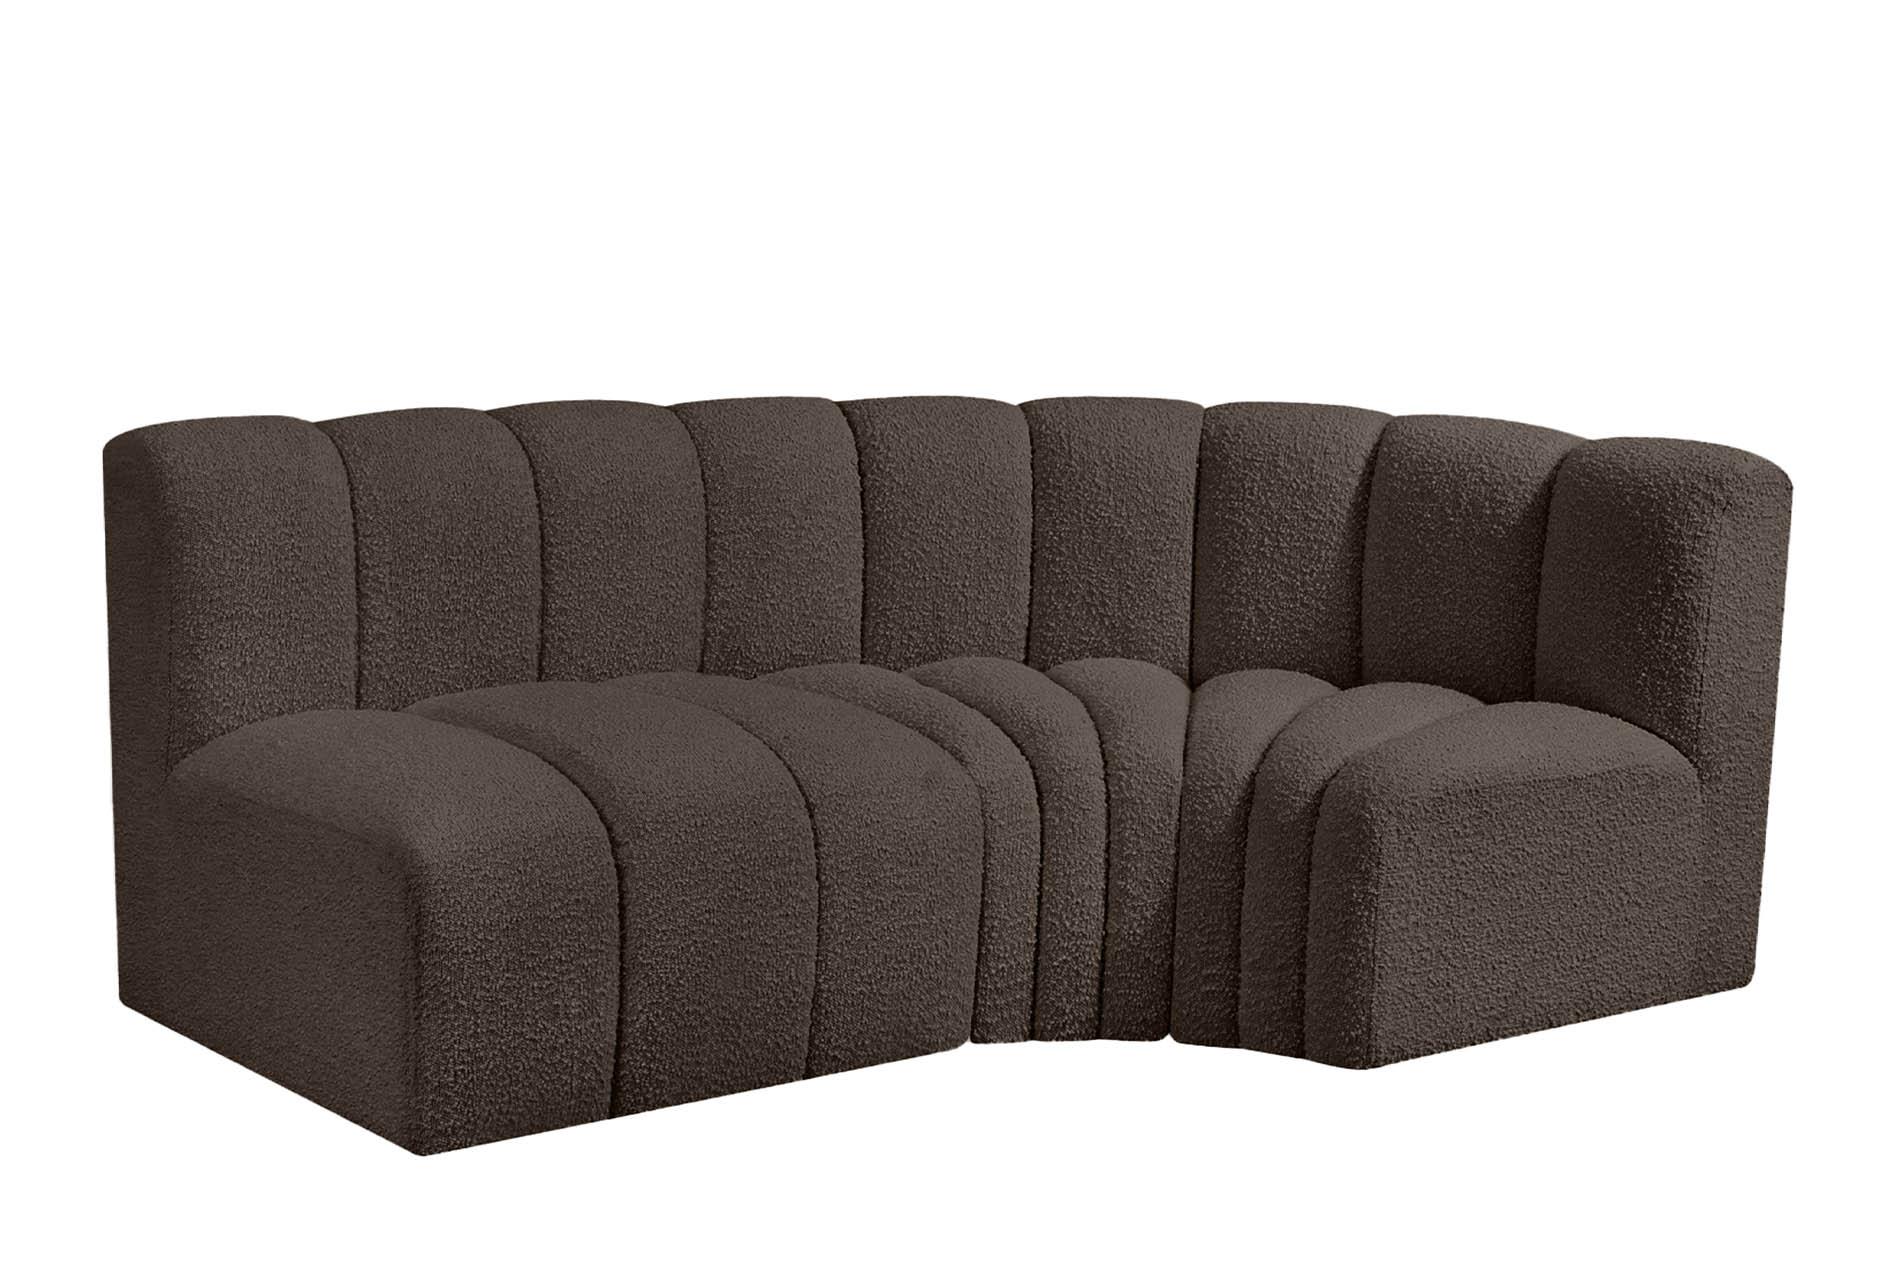 Contemporary, Modern Modular Sectional Sofa ARC 102Brown-S3A 102Brown-S3A in Brown 